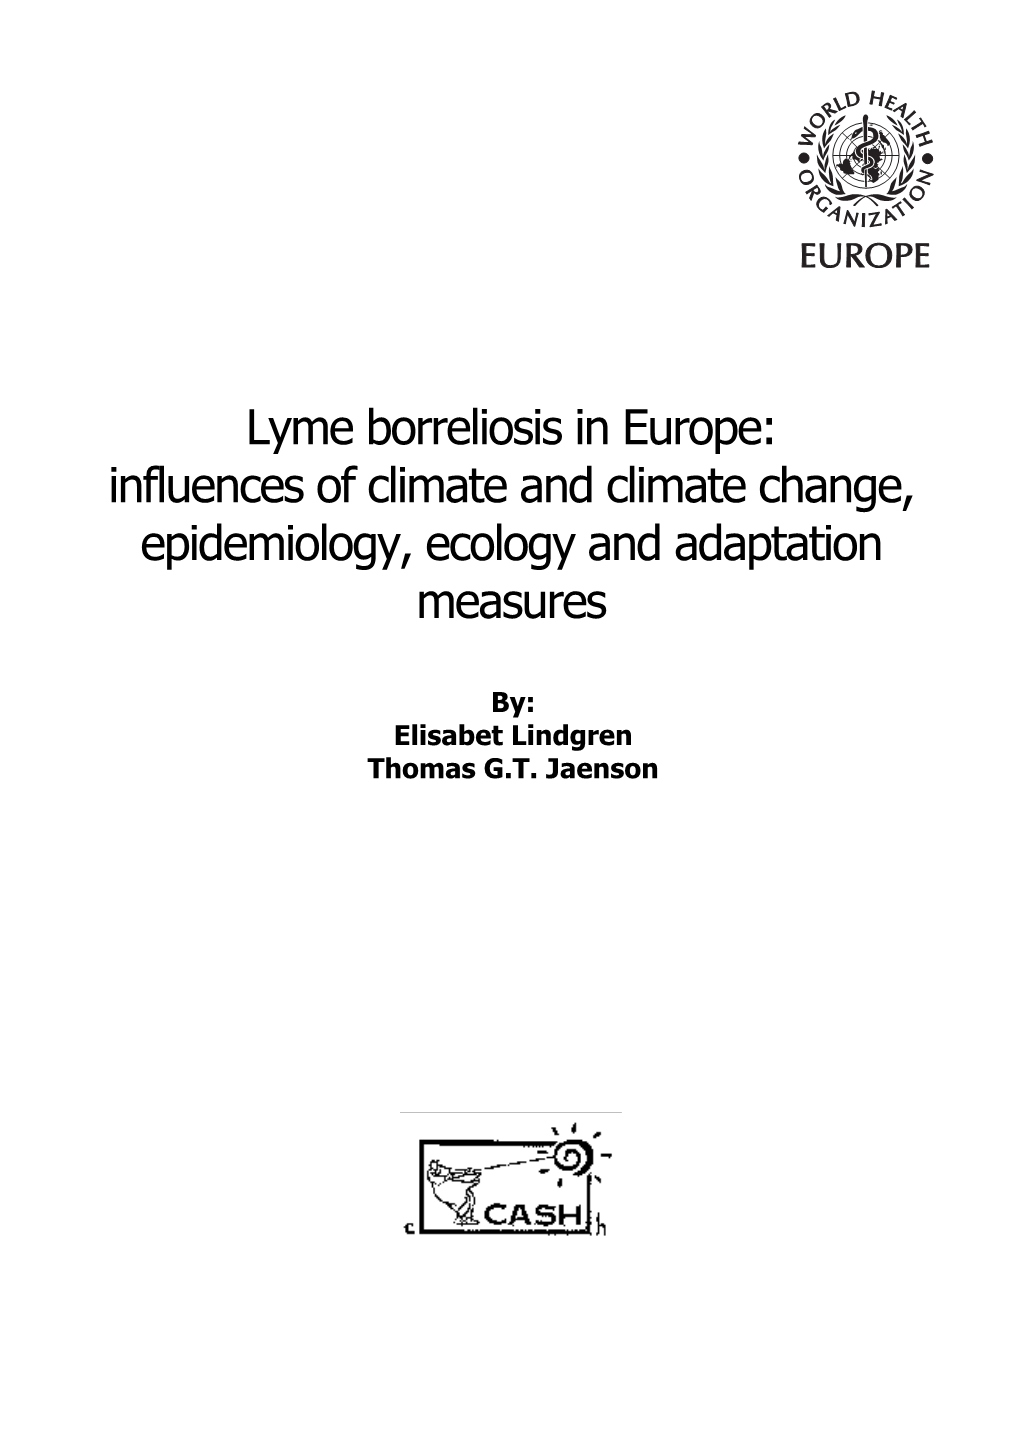 Lyme Borreliosis in Europe: Influences of Climate and Climate Change, Epidemiology, Ecology and Adaptation Measures